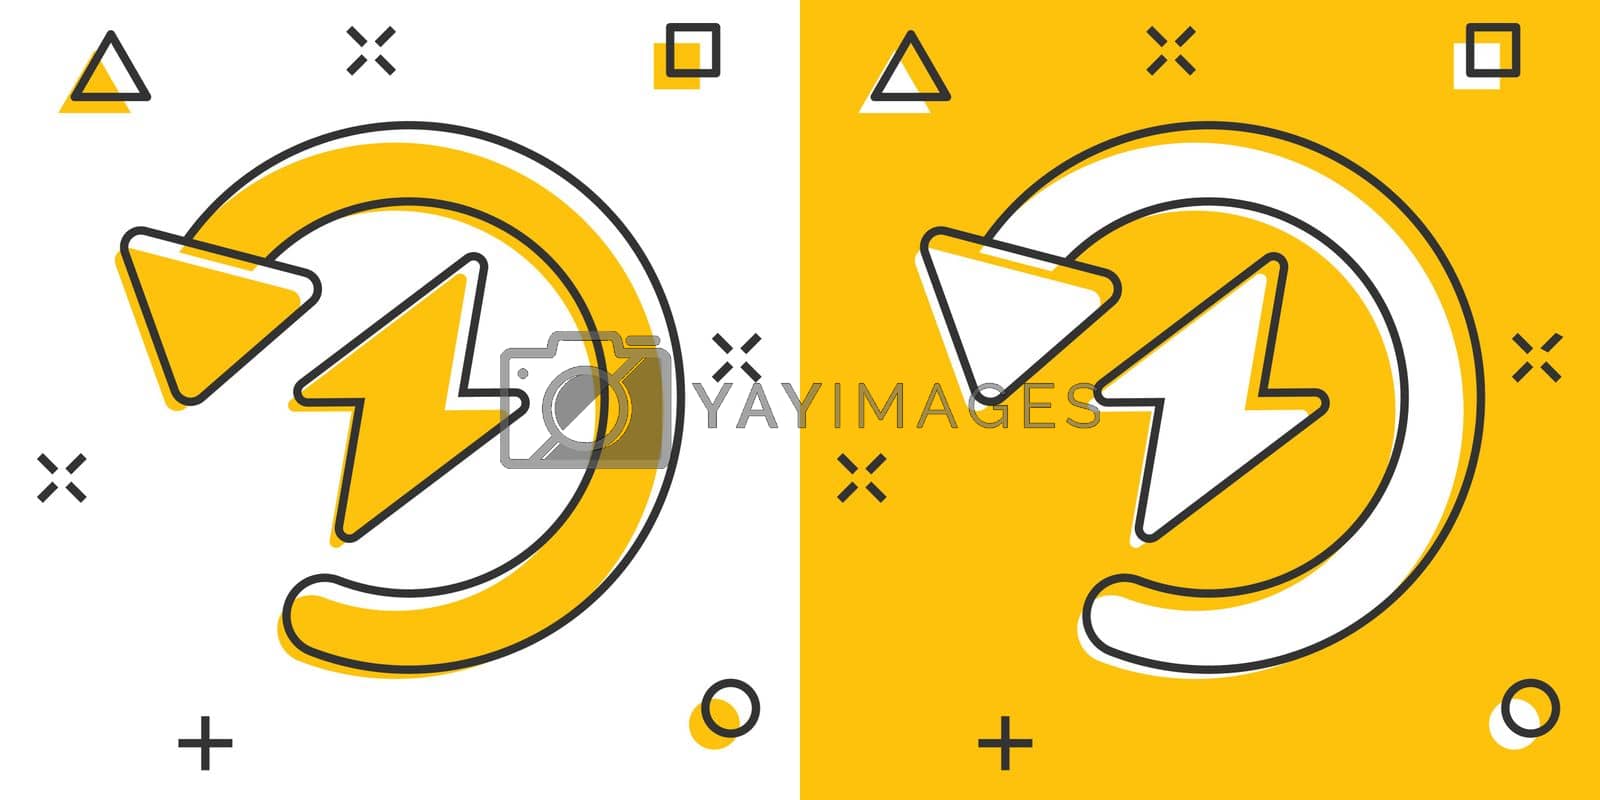 Royalty free image of Energy recharge icon in comic style. Voltage and arrow cartoon vector illustration on white isolated background. Electric splash effect sign business concept. by LysenkoA